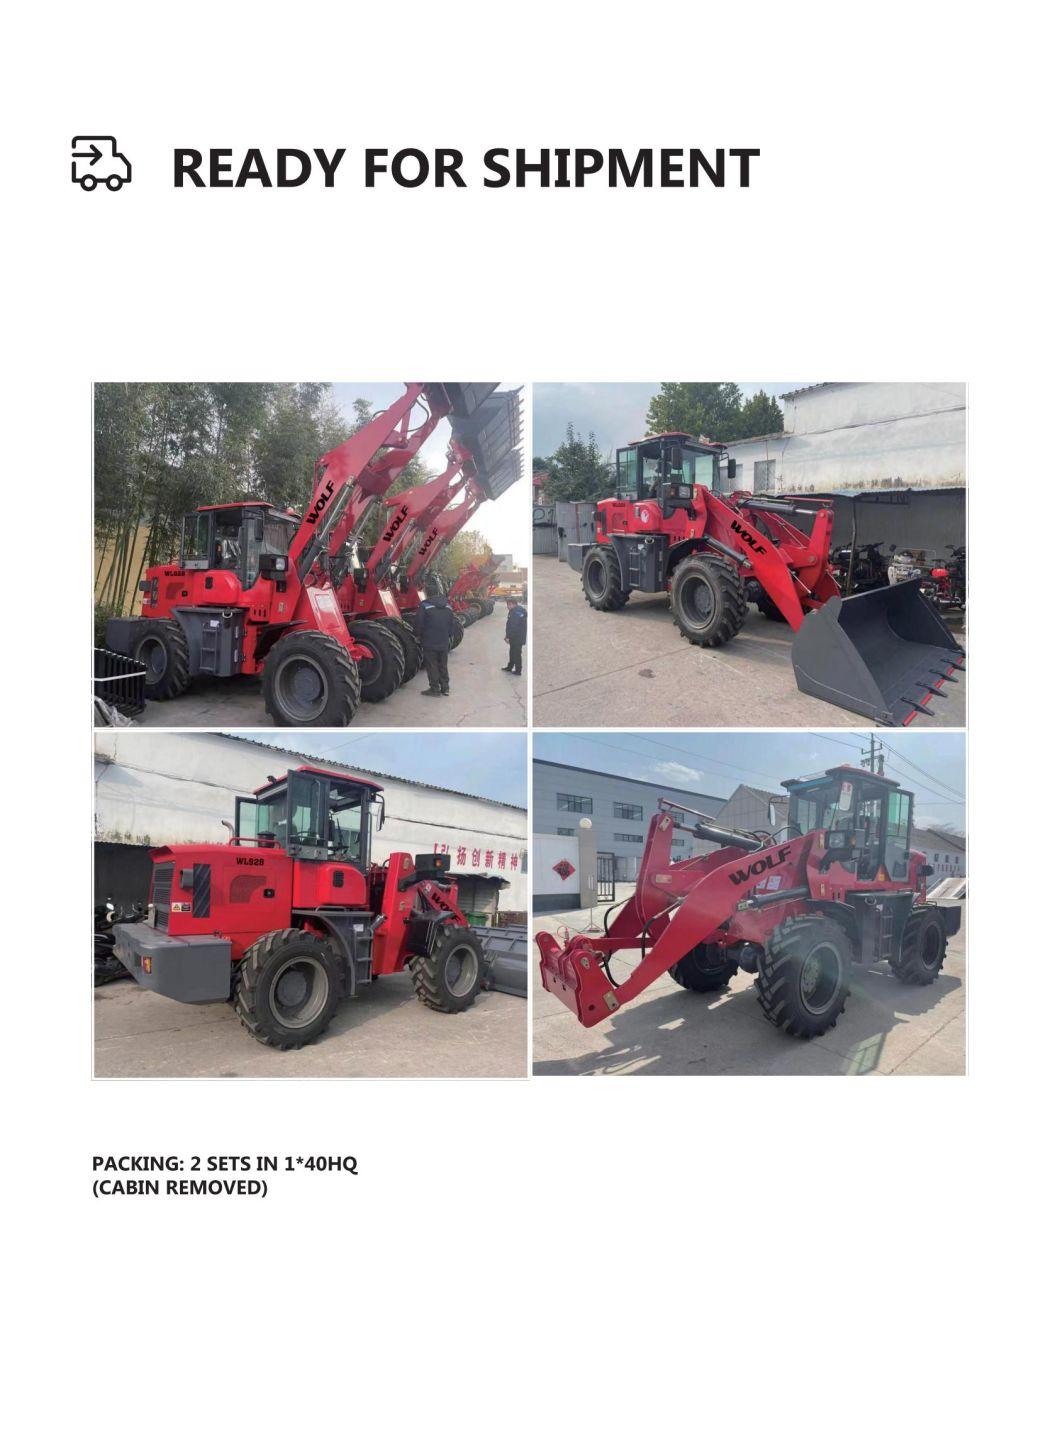 China Wheel Loader Wl928 with Rated Load 2.8t with Standard Bucket with Wood Grabber with Yto/Cummins Engine